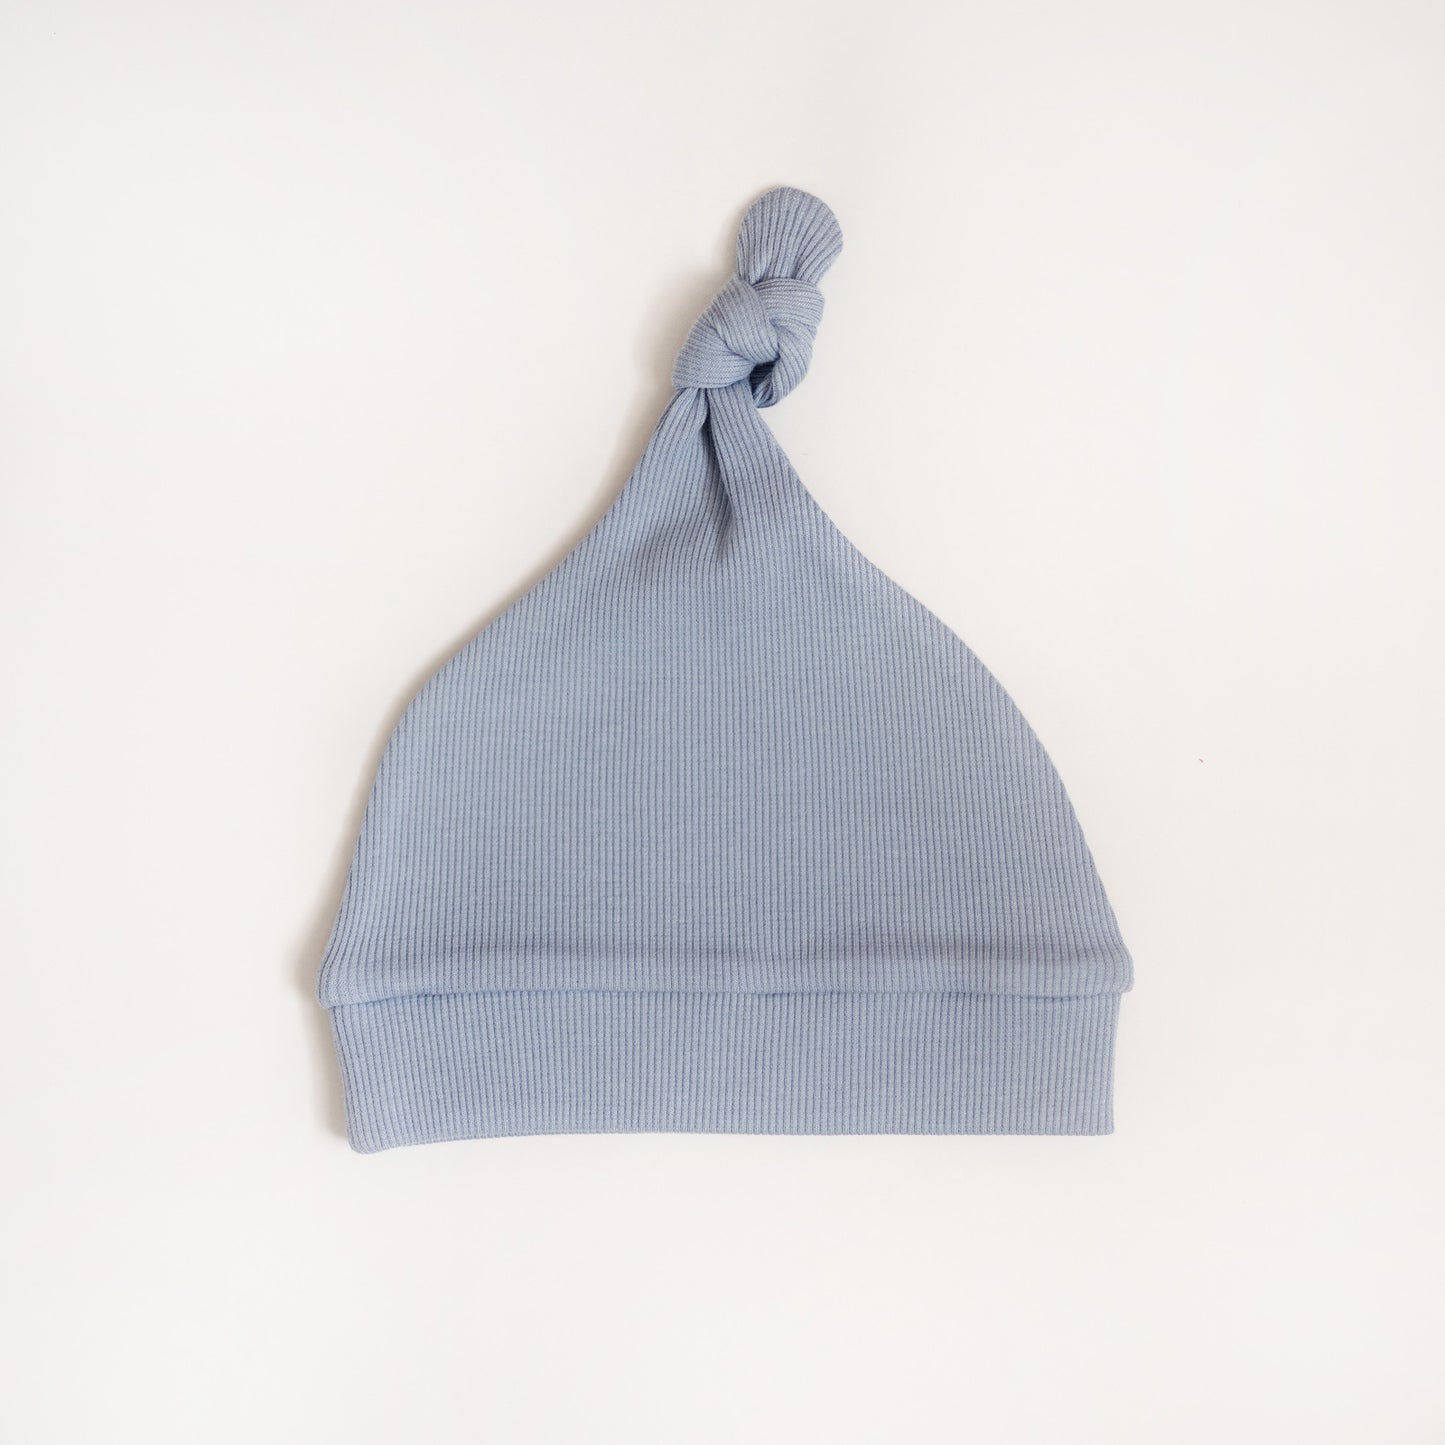 Zen Ribbed Knotted Beanie